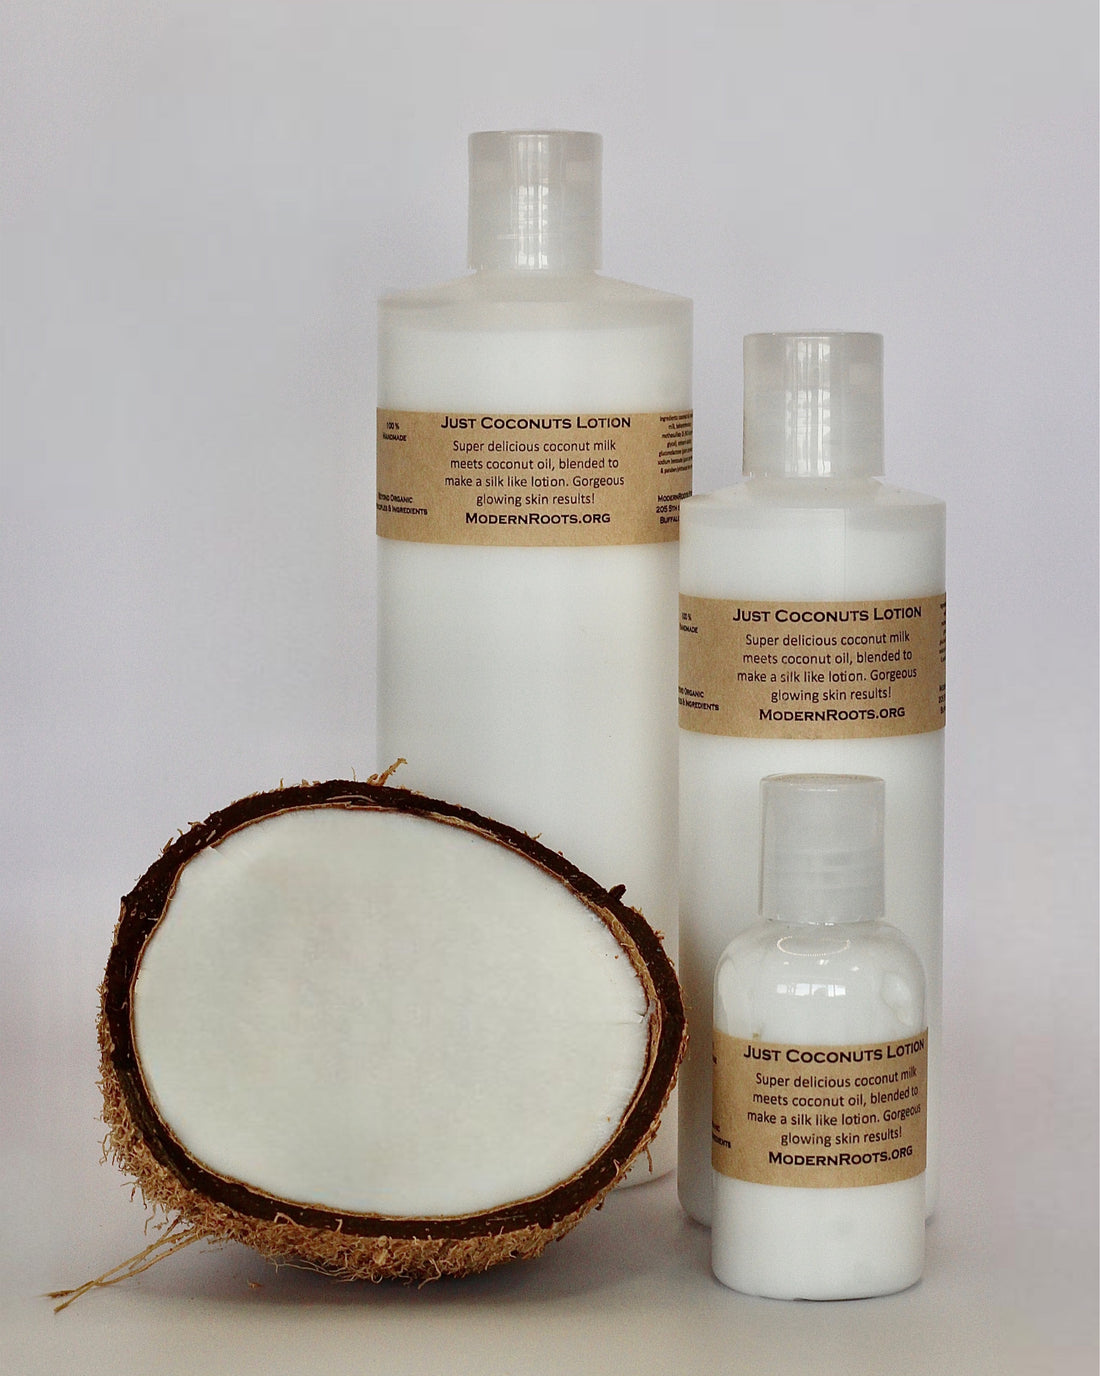 Just Coconuts: A Coconut Milk Lotion